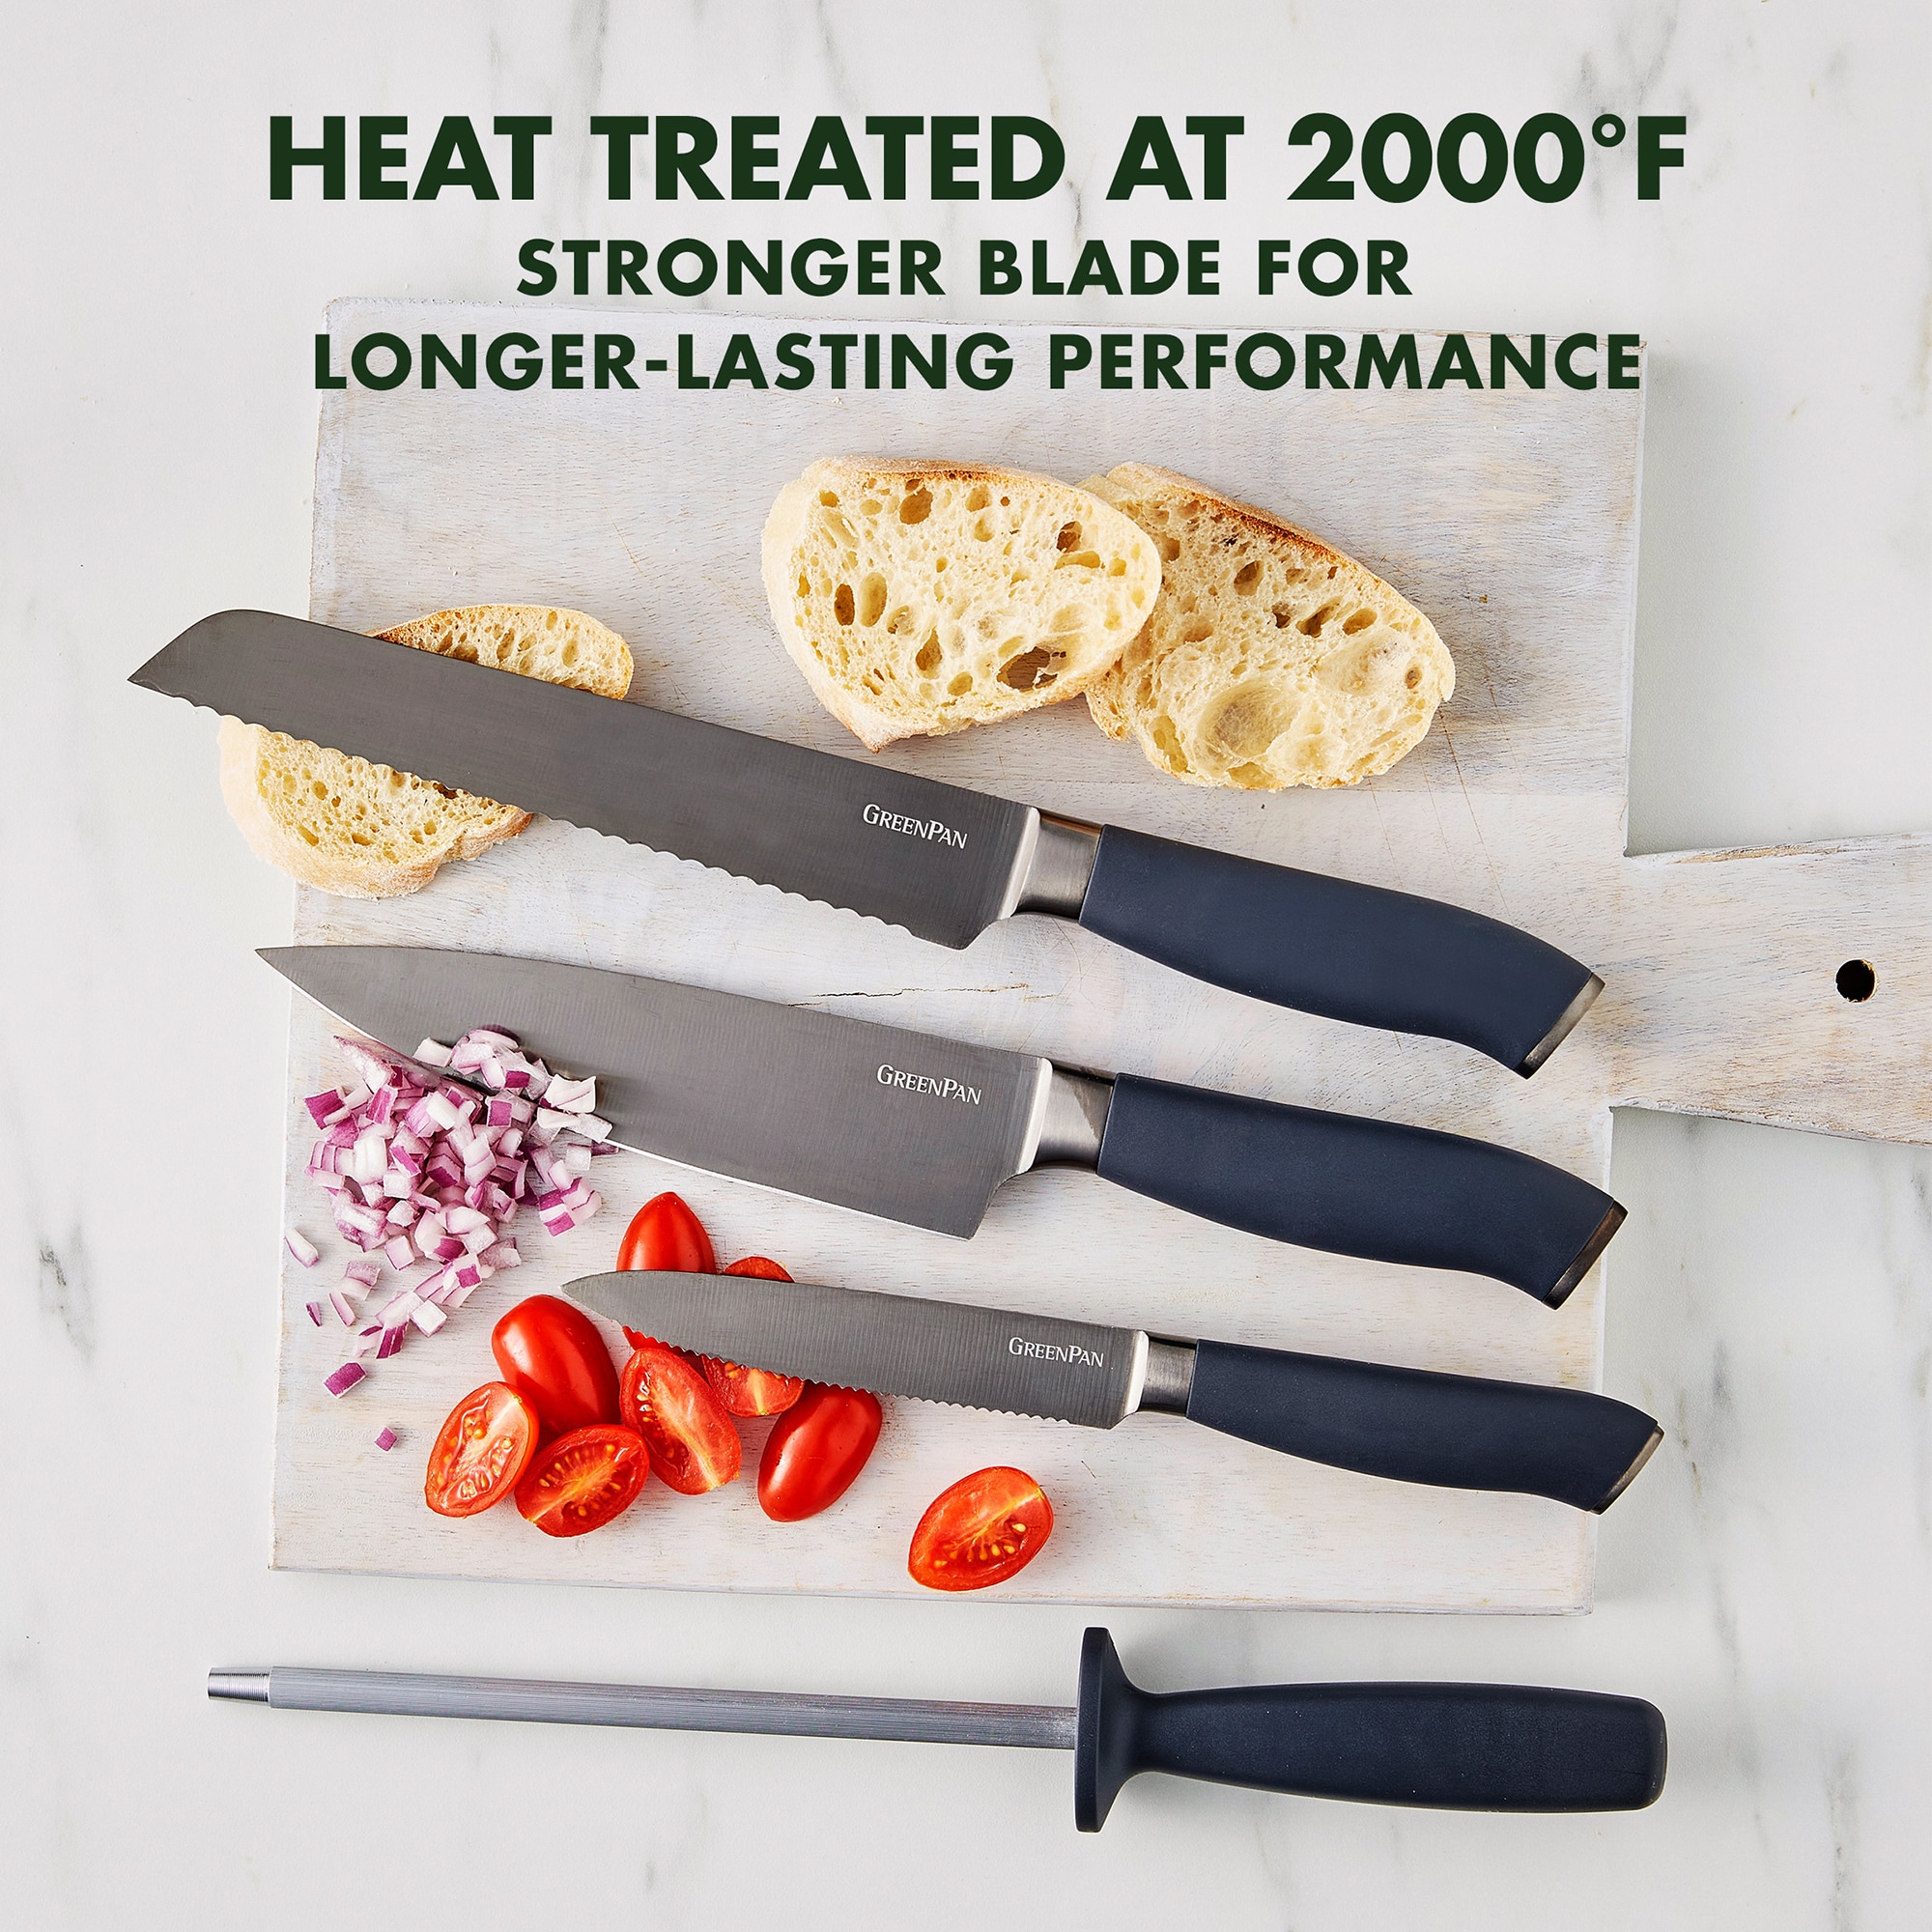 Greenpan Titanium Coated Cutlery Set - 13 Piece Knife Set with Rubber  Handle, Dishwasher Safe, Includes Chef, Santoku, Serrated, Paring Knives,  Steak Knives, Shears, and Block in the Cutlery department at